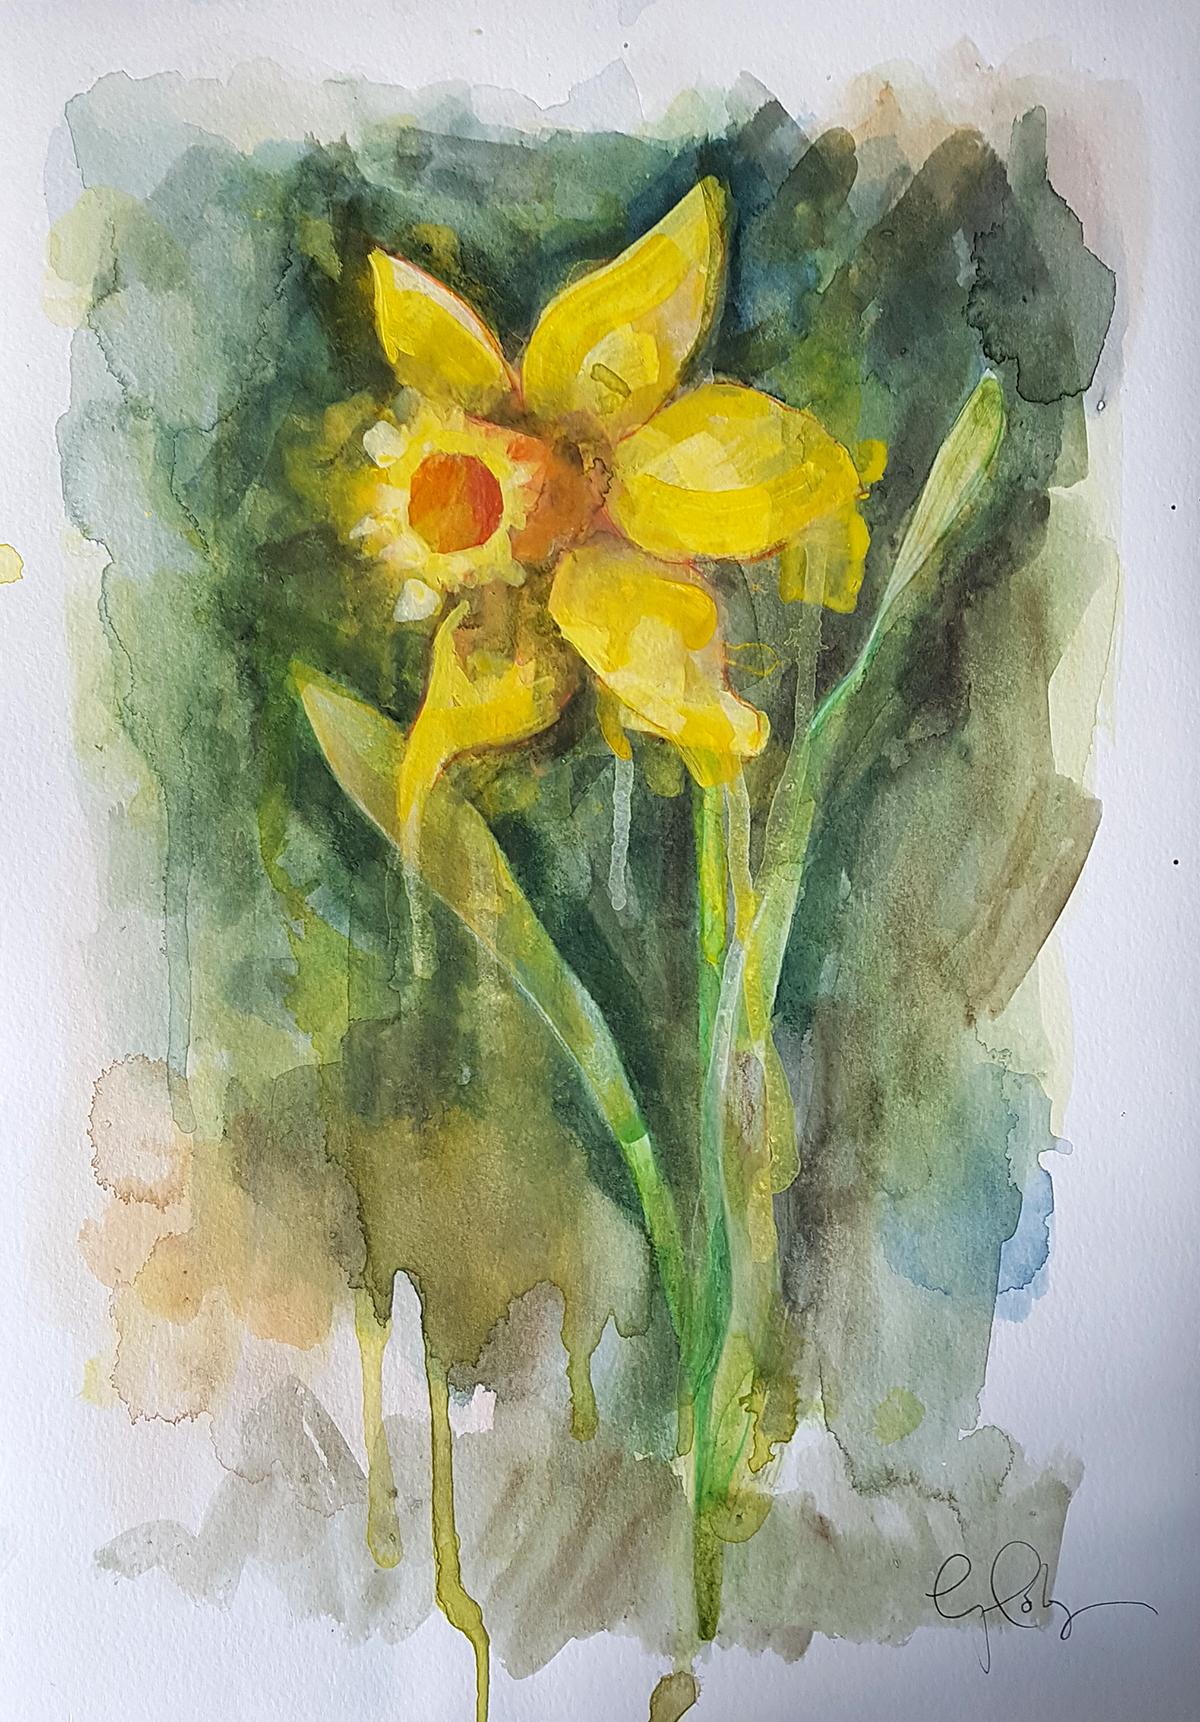  Daffodil by Gavin Dobson
Hand Signed by the Artist
Original Still Life Painting
Watercolour Paint on Paper
Size: H 42cm x W 29.7cm x D 0.01
Sold Unframed
Please note that in situ images are purely an indication of how a piece may look.
Daffodil is